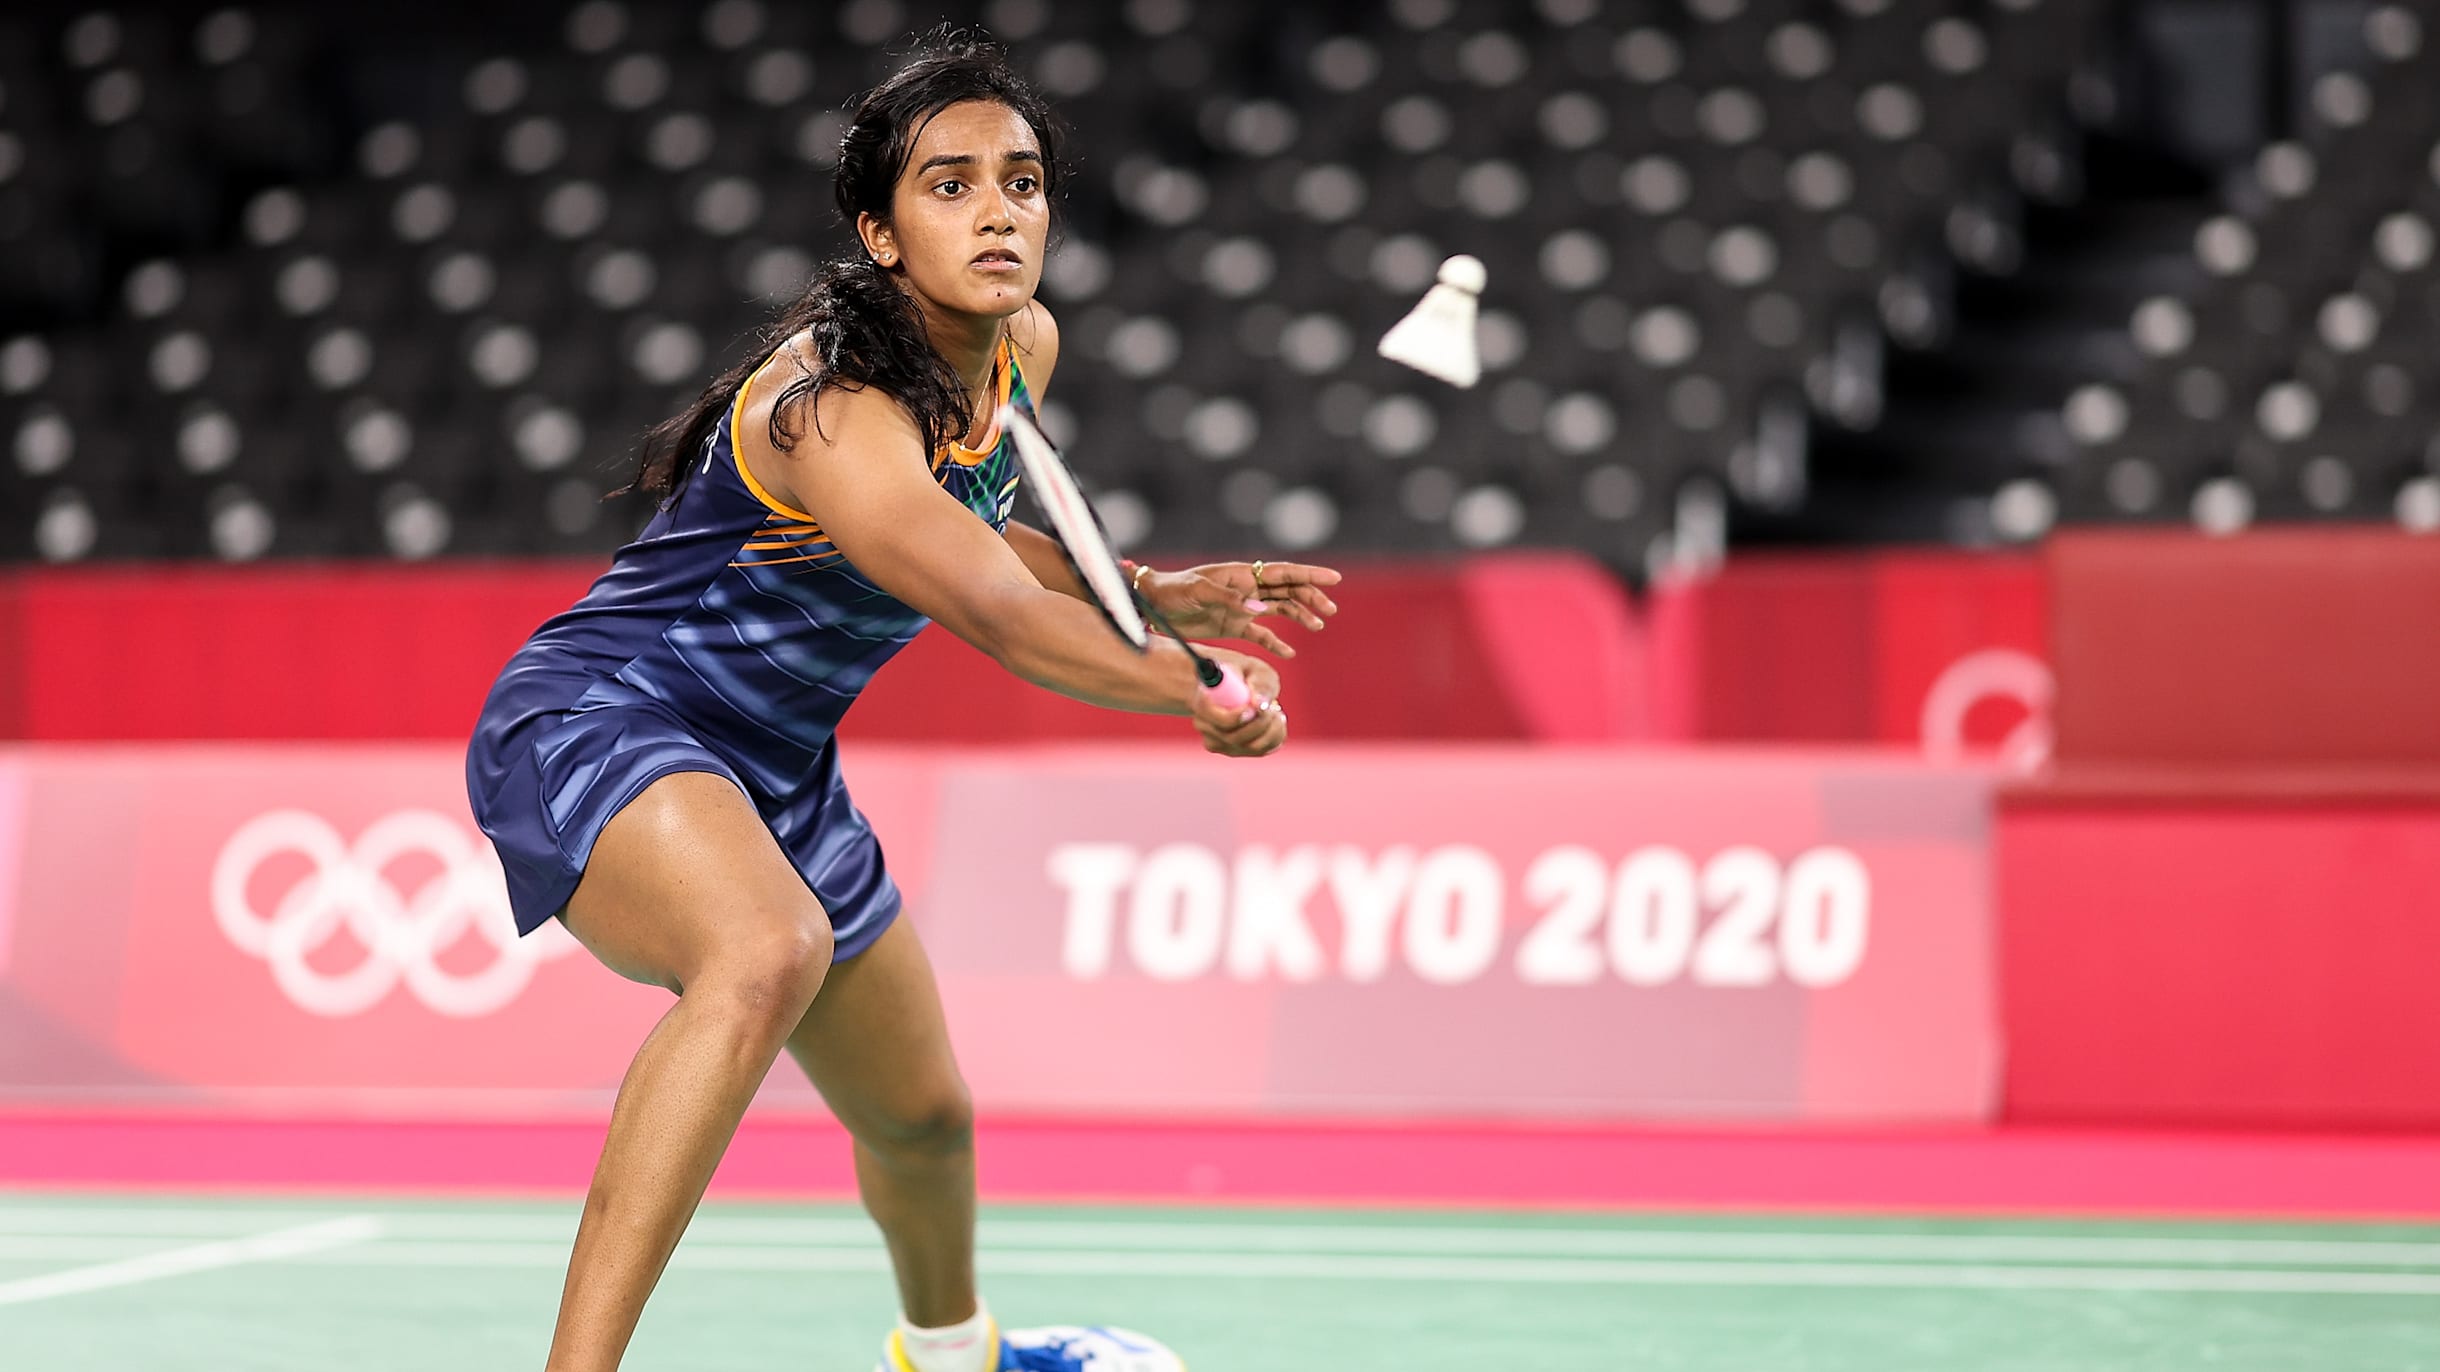 pv sindhu match today live time and channel